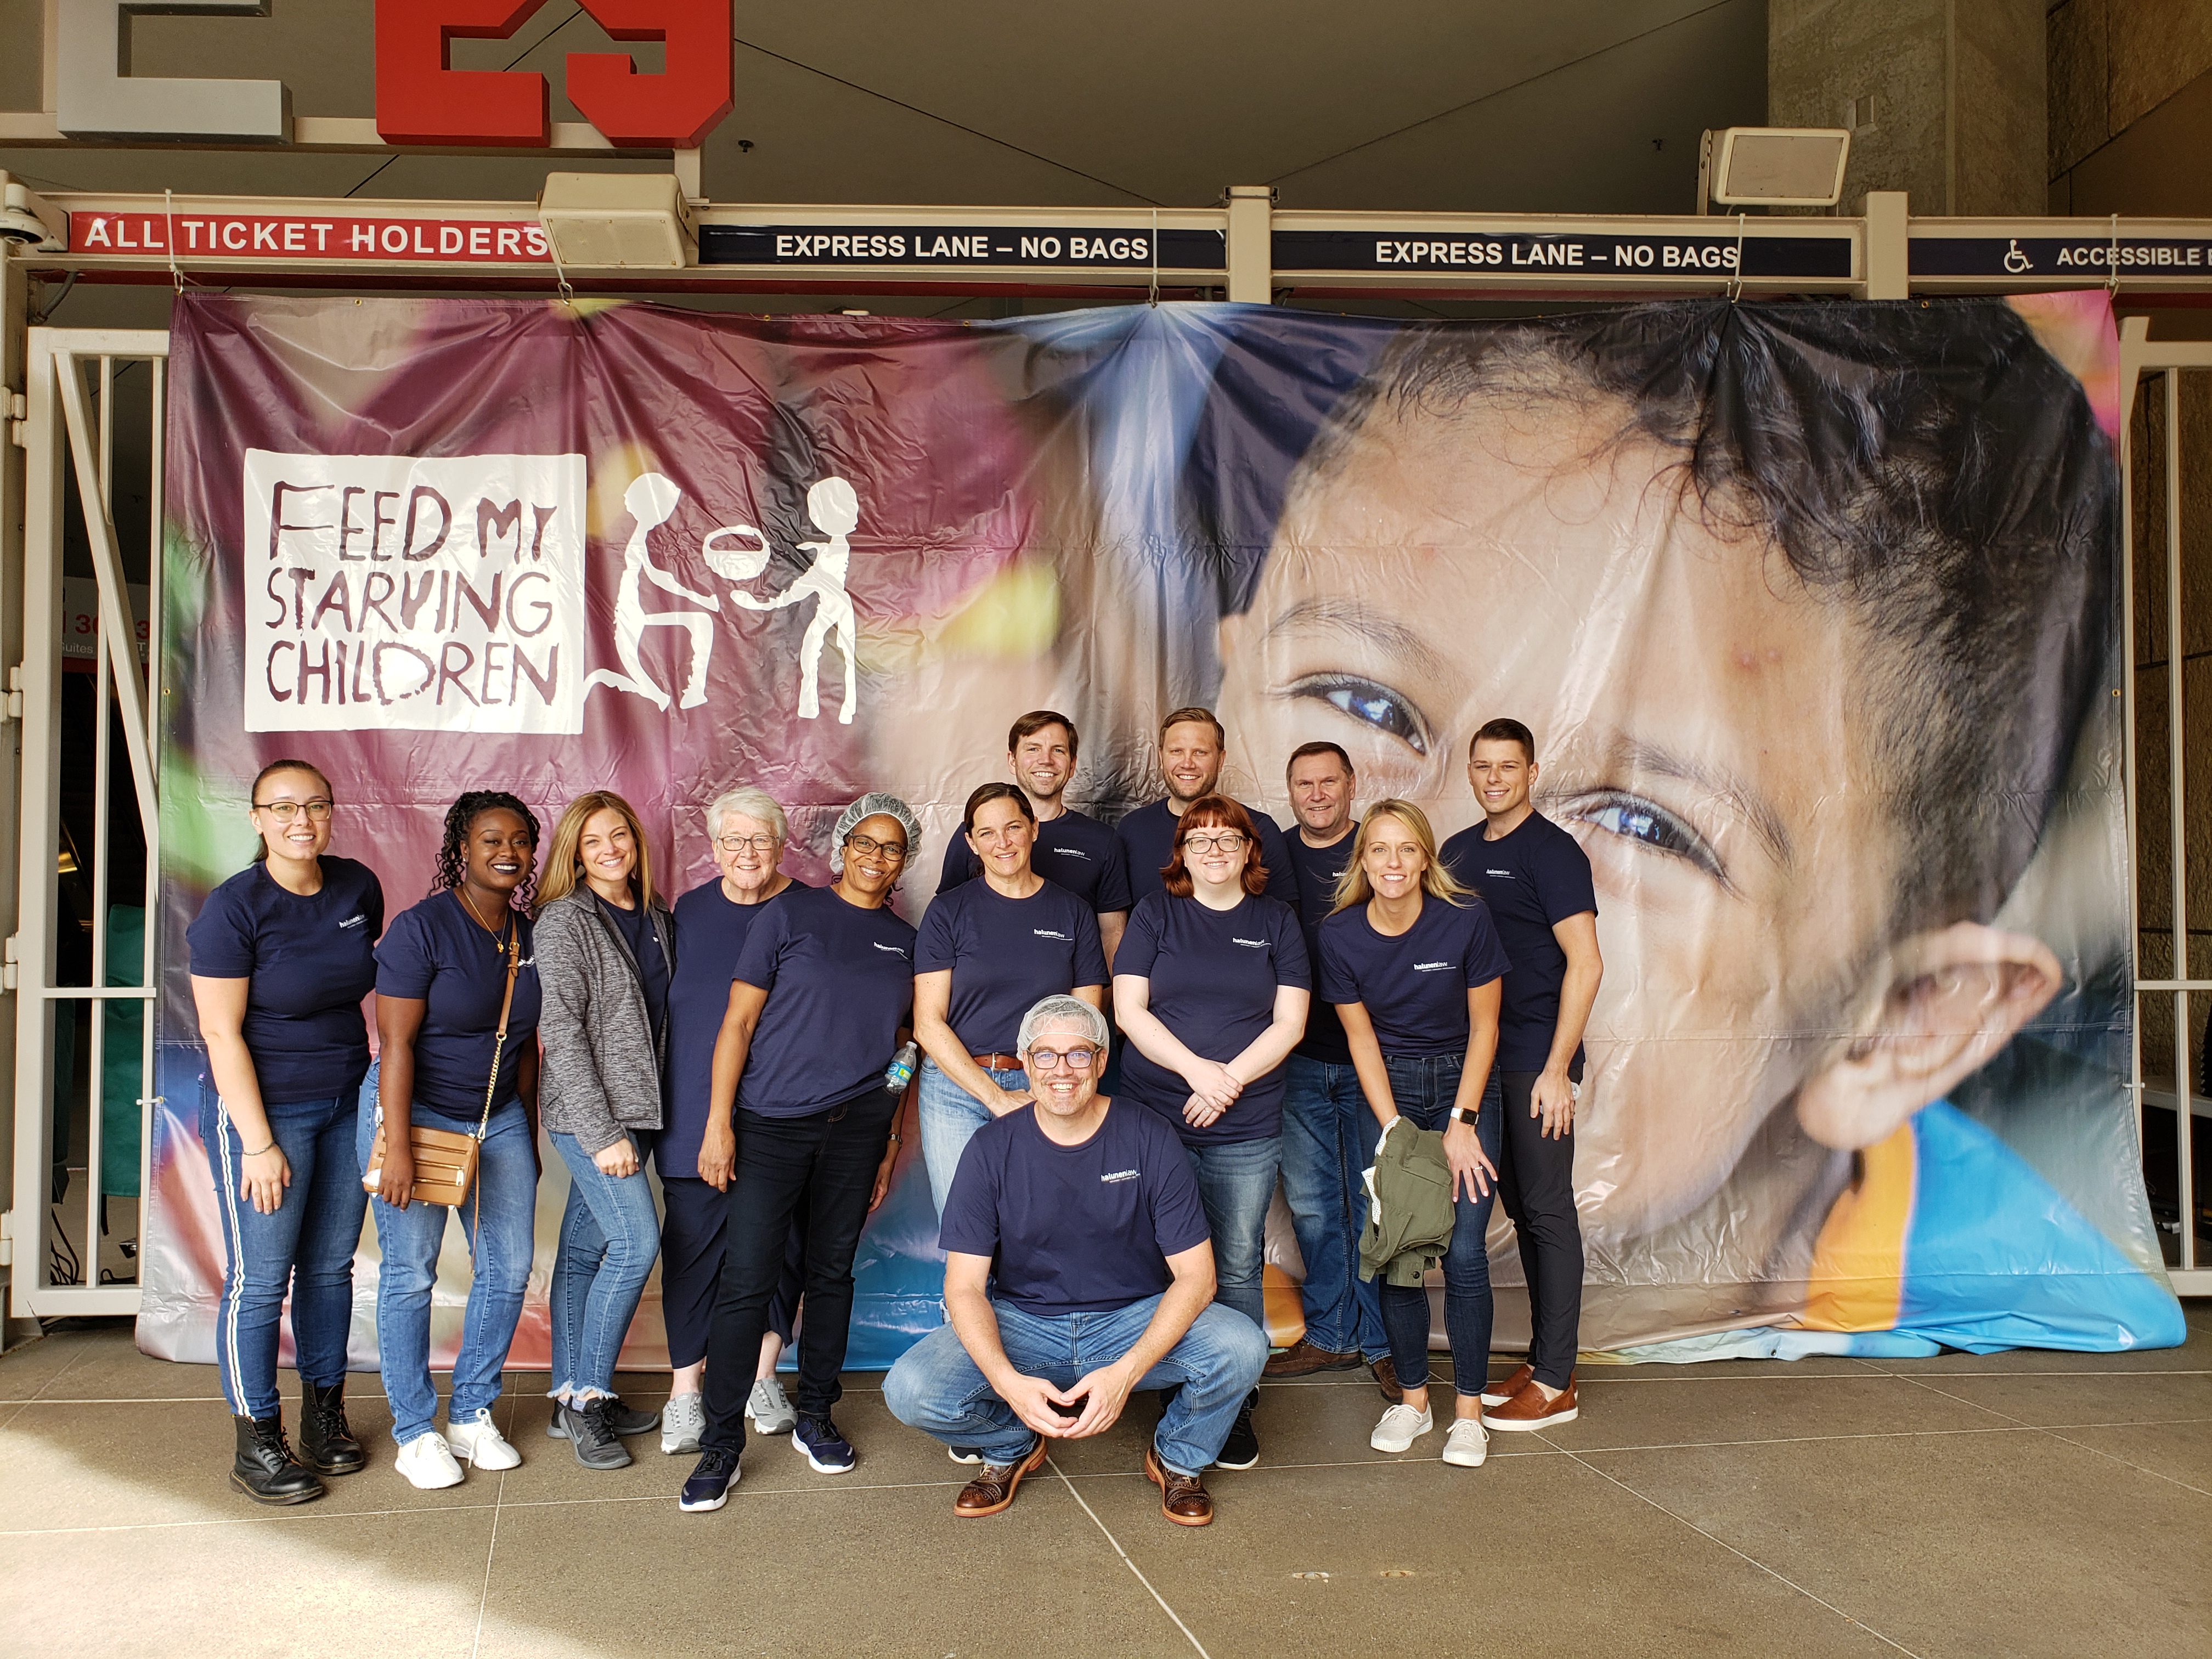 the Halunen Law team stand in front of a colorful banner reading "Feed My Starving Children" while wearing matching dark blue t-shirts. Smiling, the team greets the camera, ready for the FMSC event.